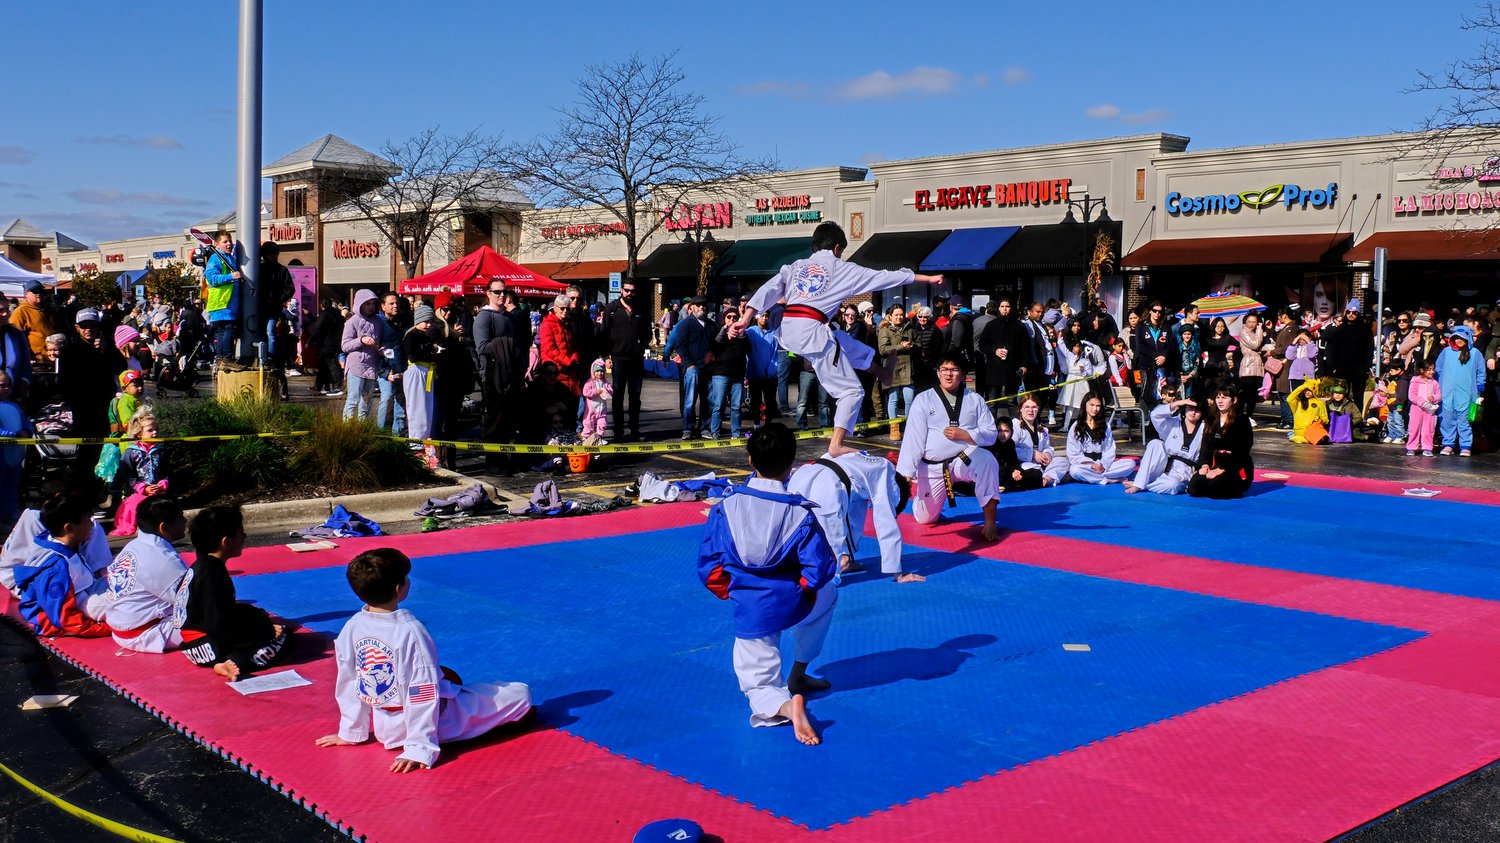 Lee's Martial Arts Demo team having a girls vs. boys competition.